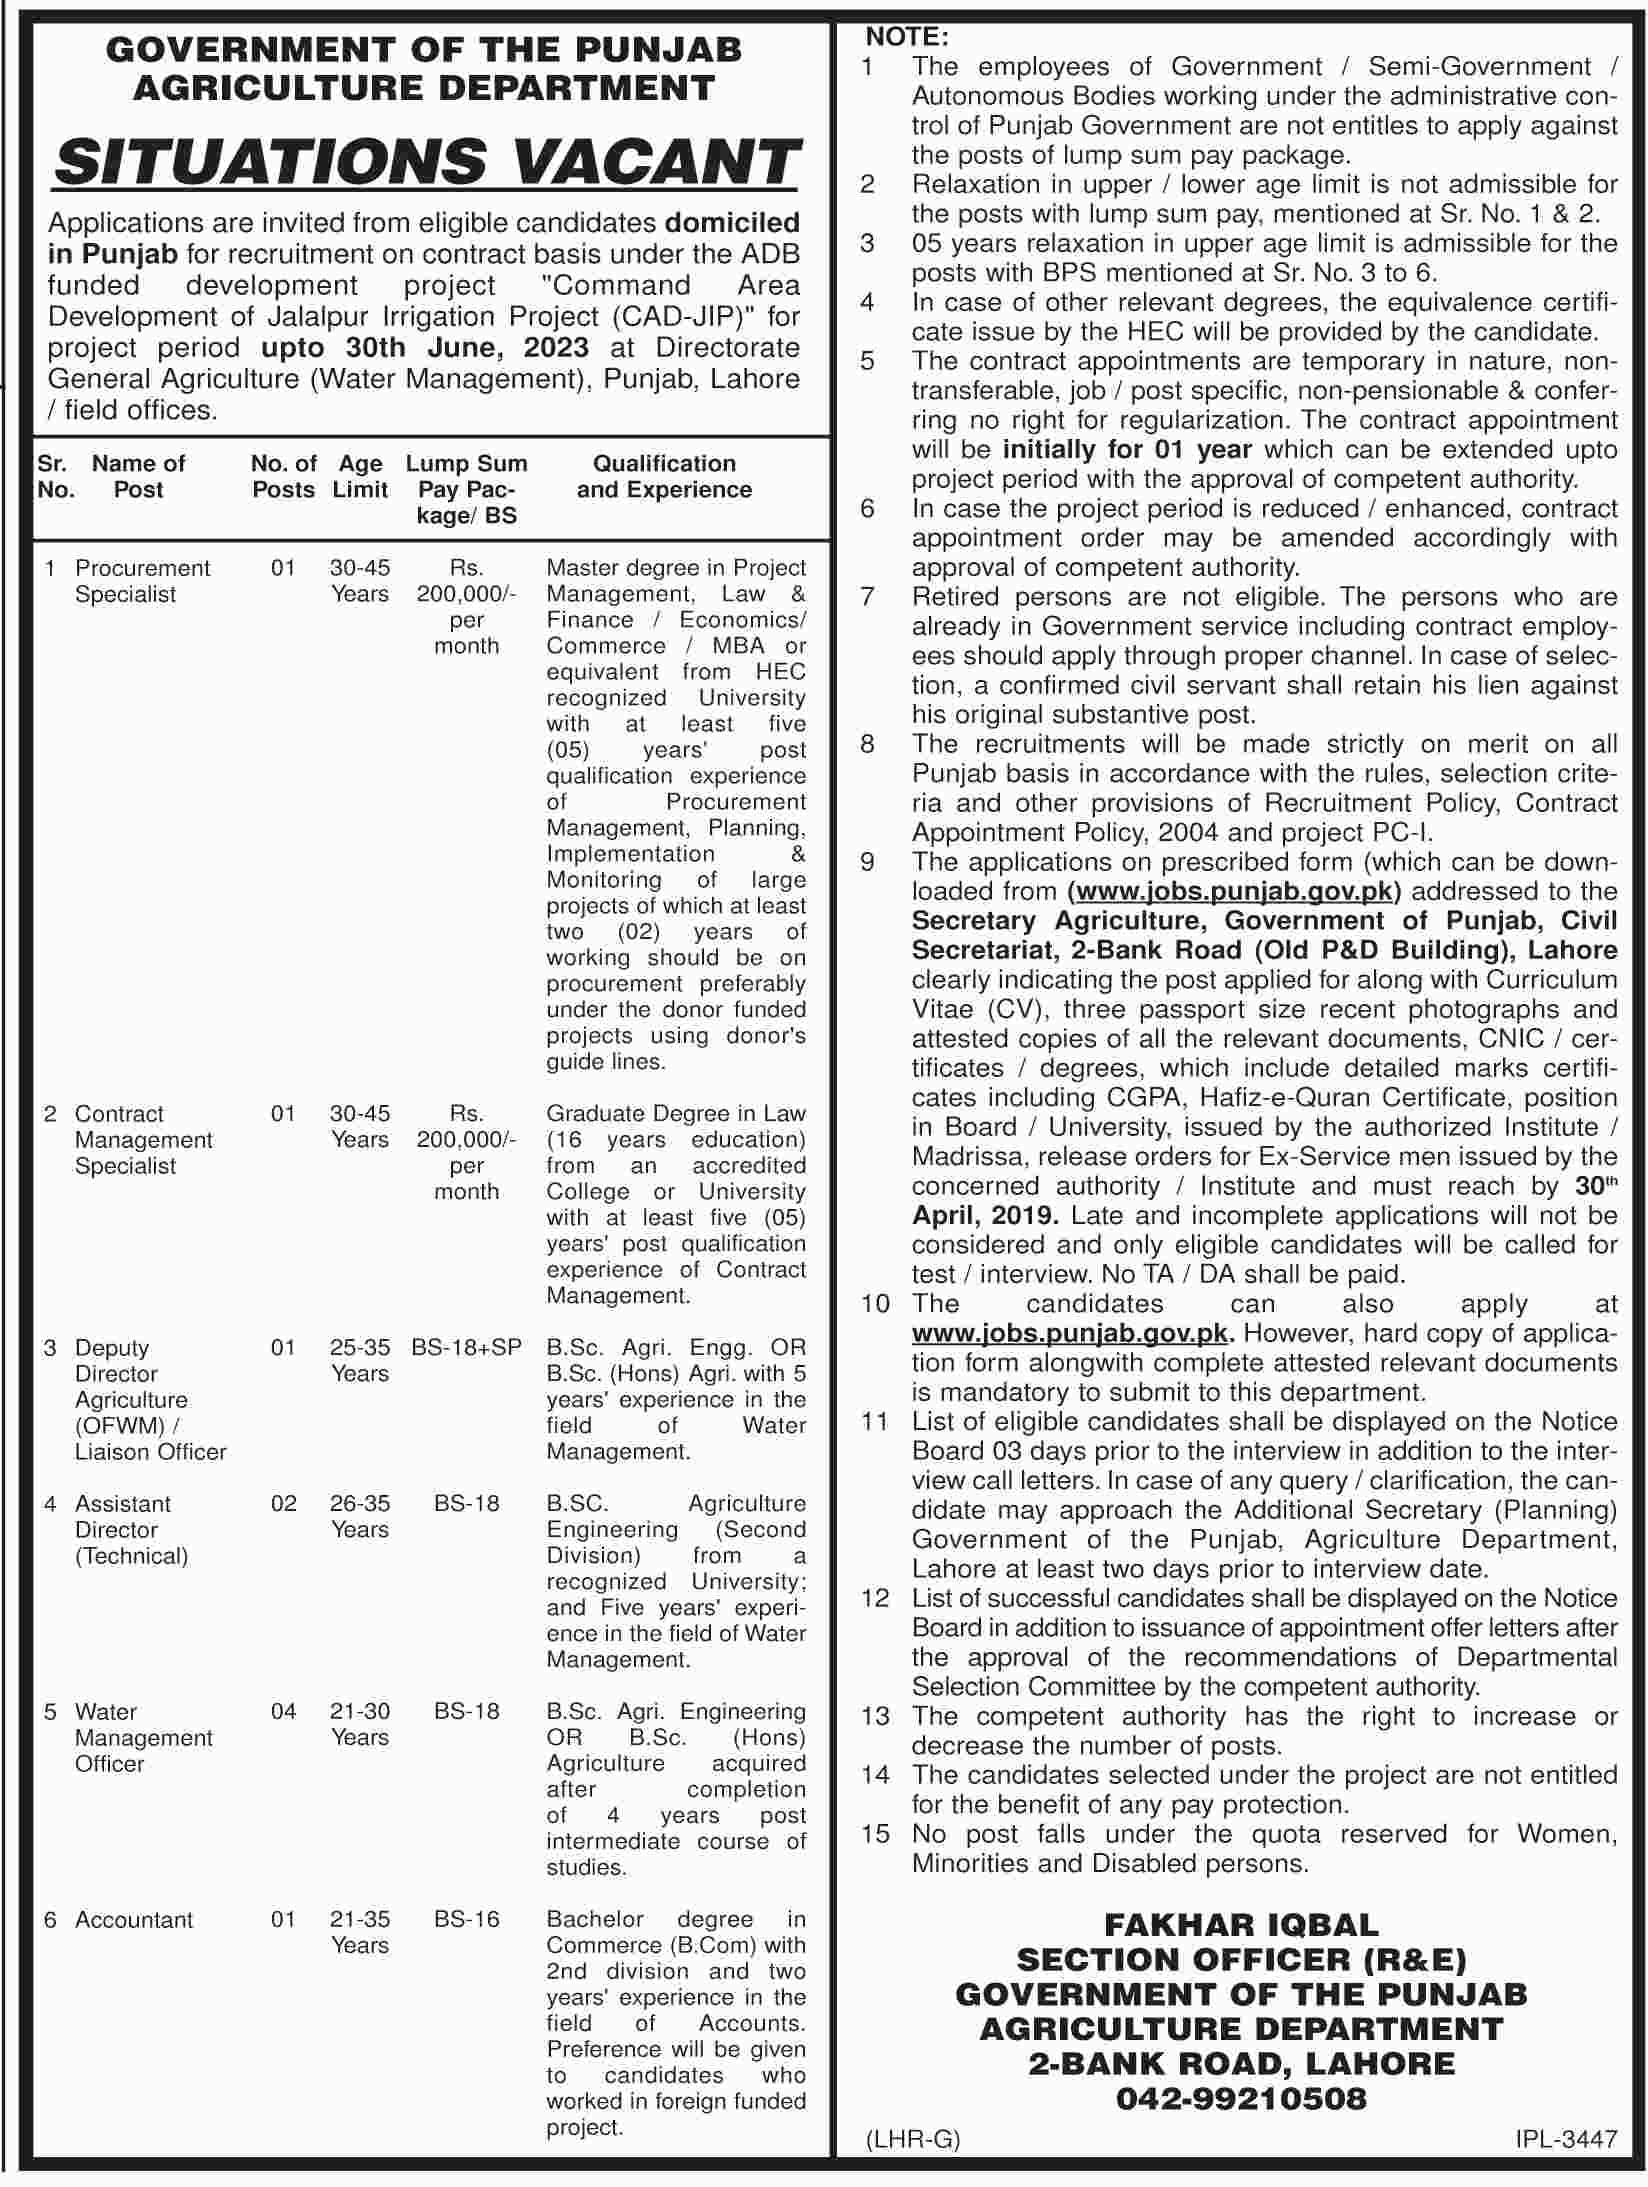 Government Of Punjab Agriculture Department Jobs 2019 Apply Online